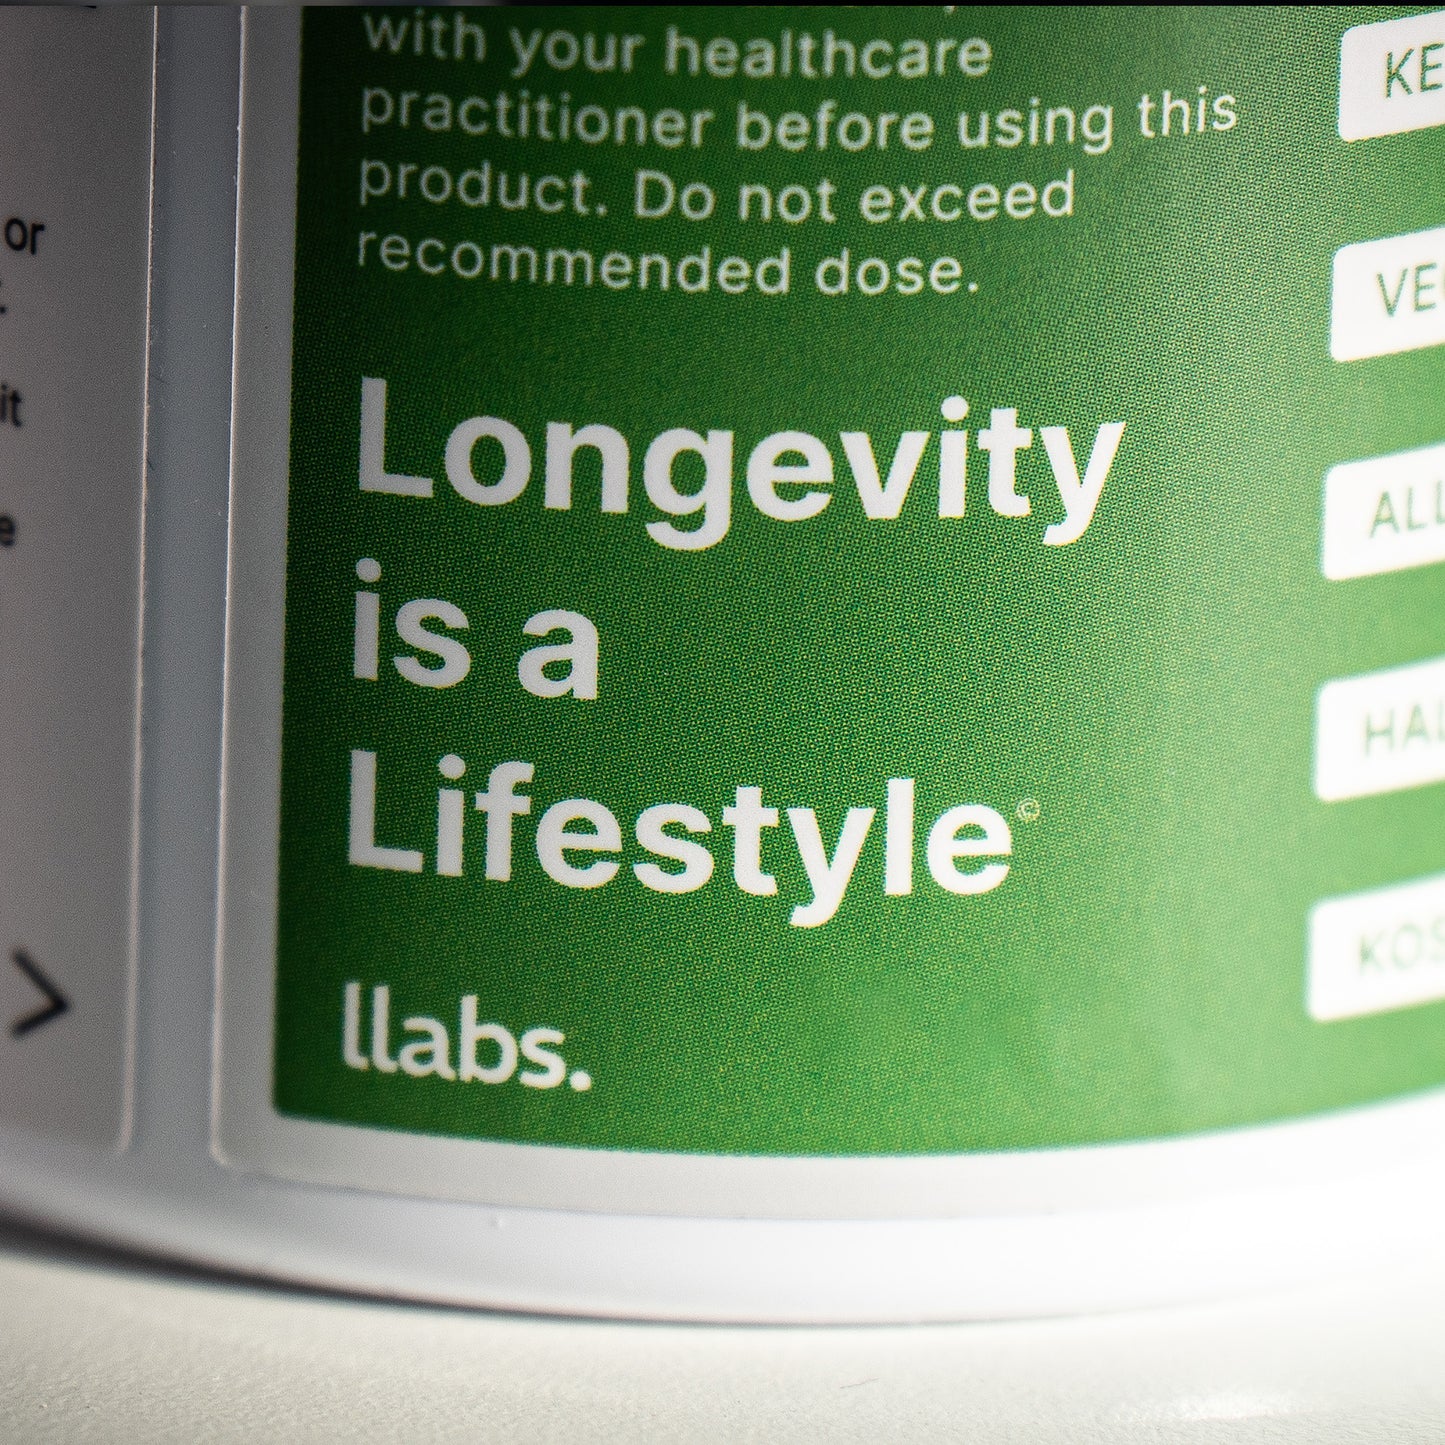 Close-up of a llabs. TMG (Betaine) Capsules bottle with the slogan "longevity is a lifestyle" visible on the label.